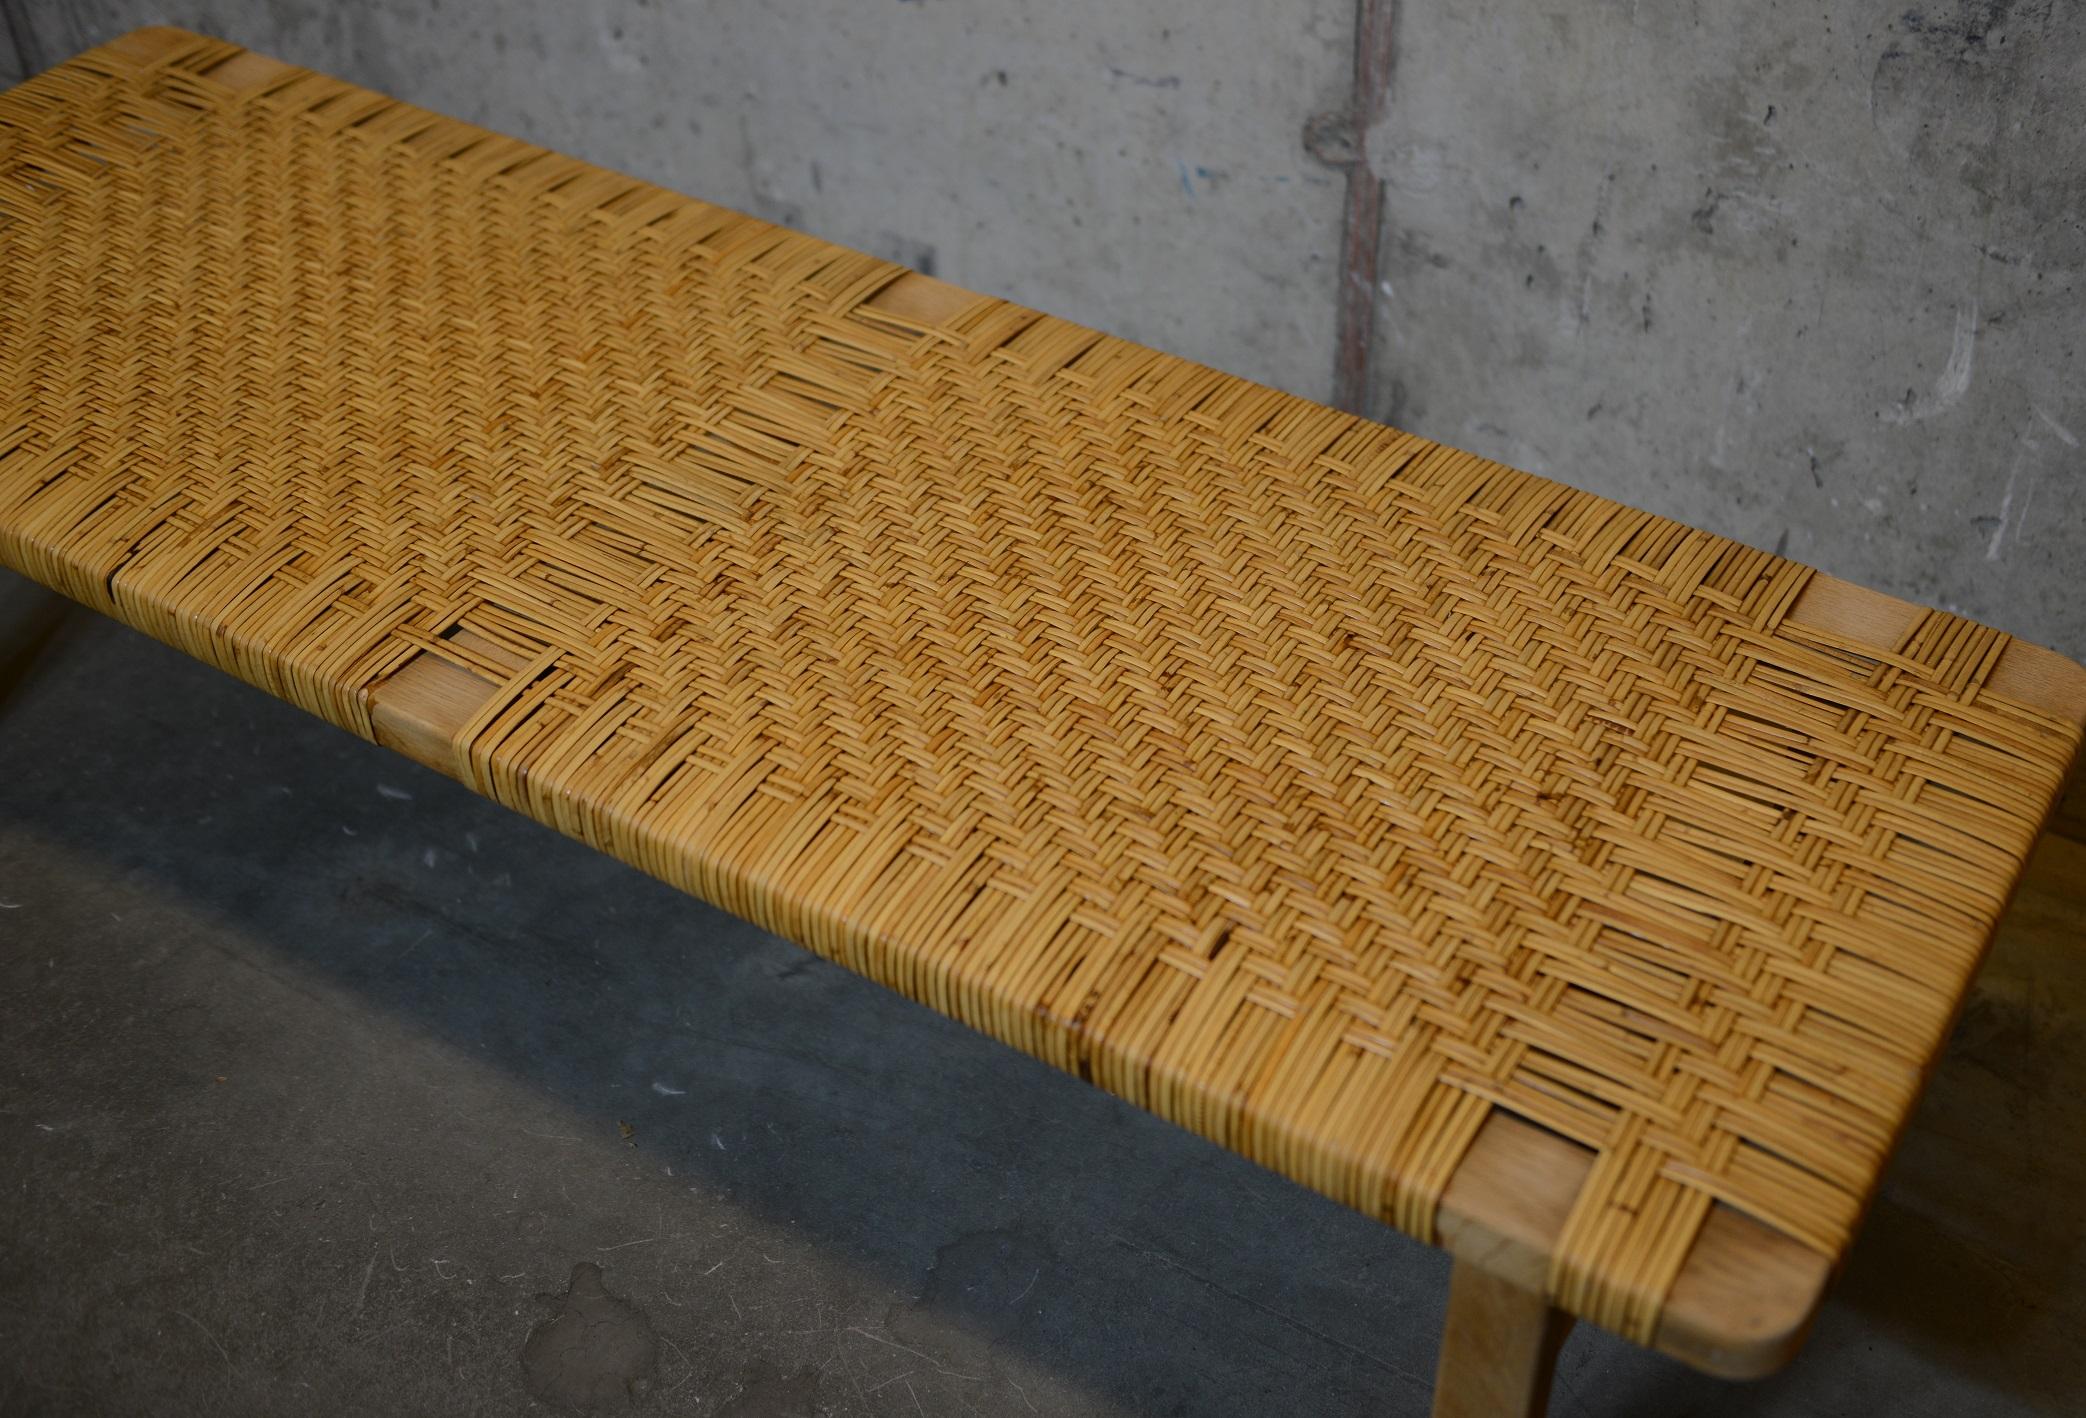 Scandinavian furniture design by Danish designer Børge Mogensen. Produced in the 1960s by Fredericia Furniture in Denmark. This bench is made of oak and rattan / cane. Quality in design, materials and craftsmanship.